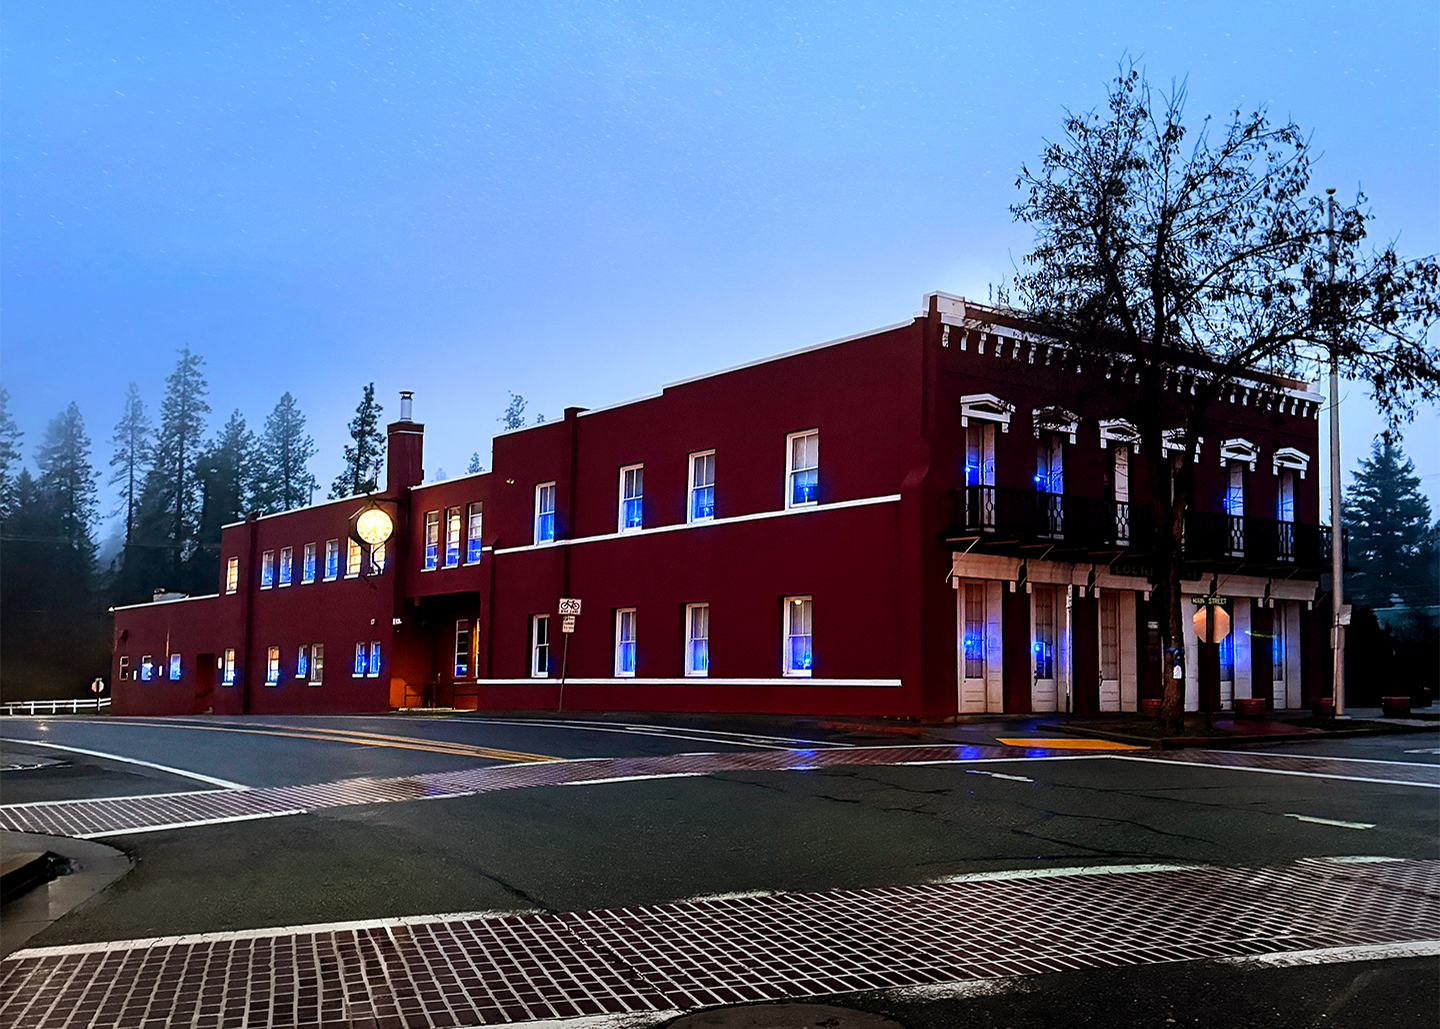 The windows of the Historic Trinity County Courthouse are light up blue.